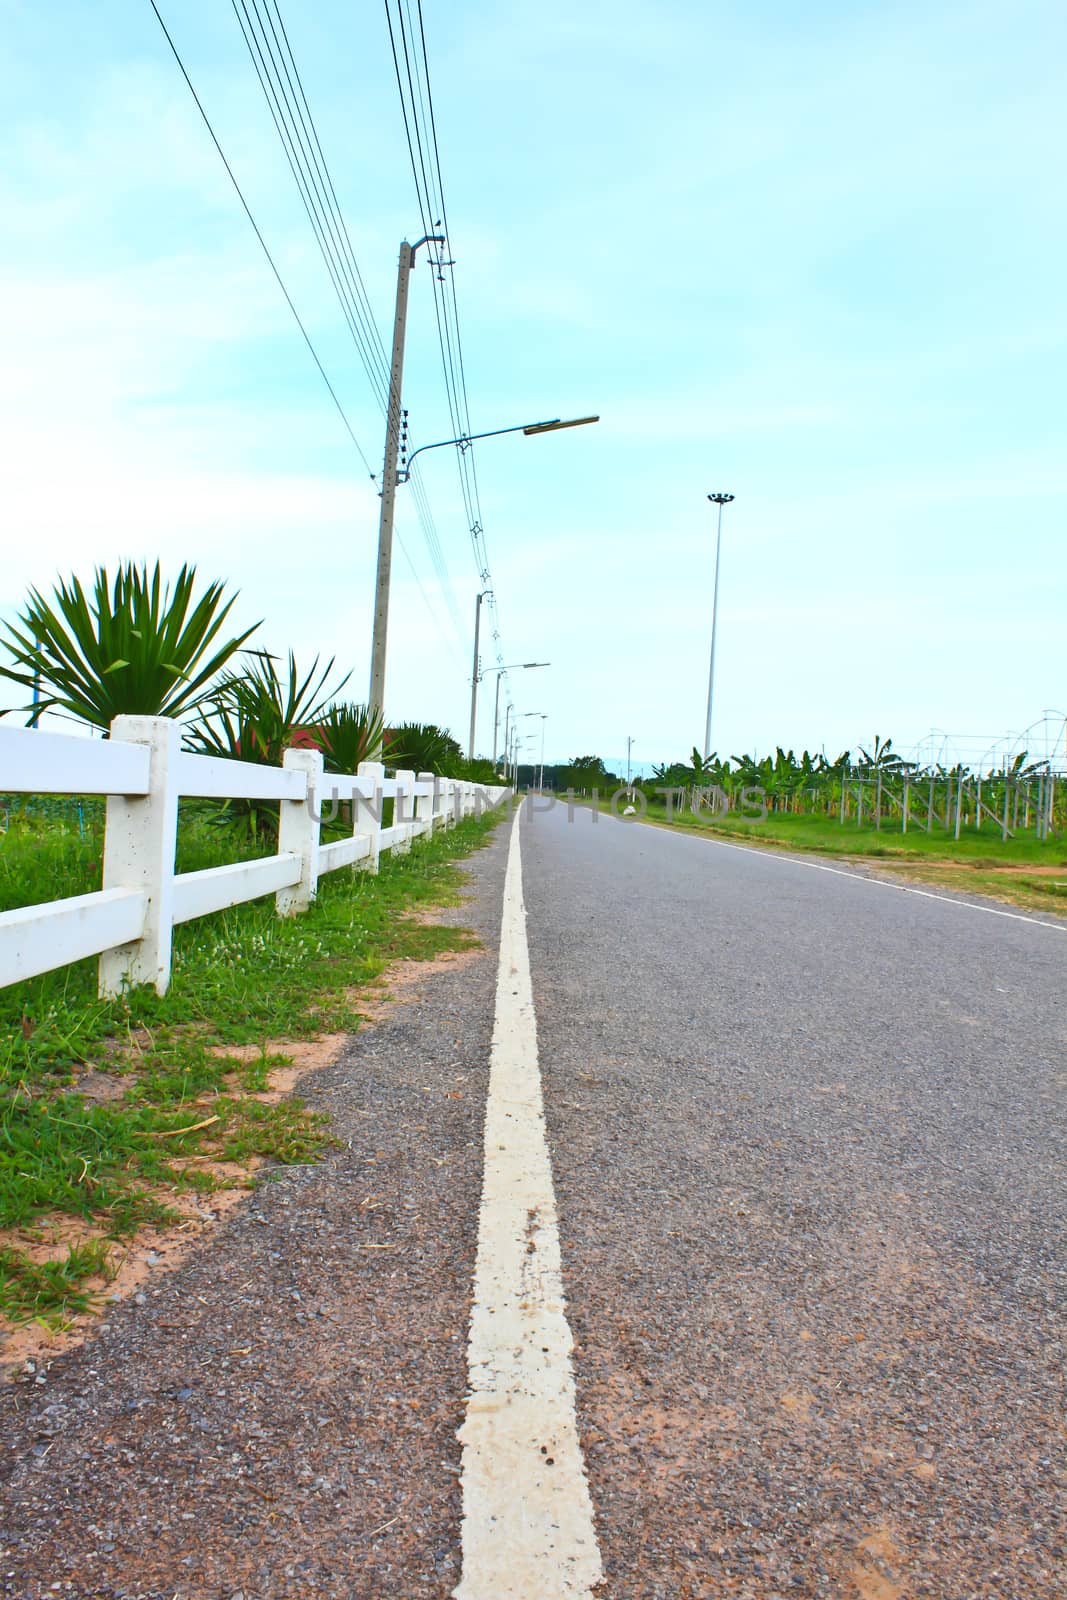 Long  private, country road along a white picket fence